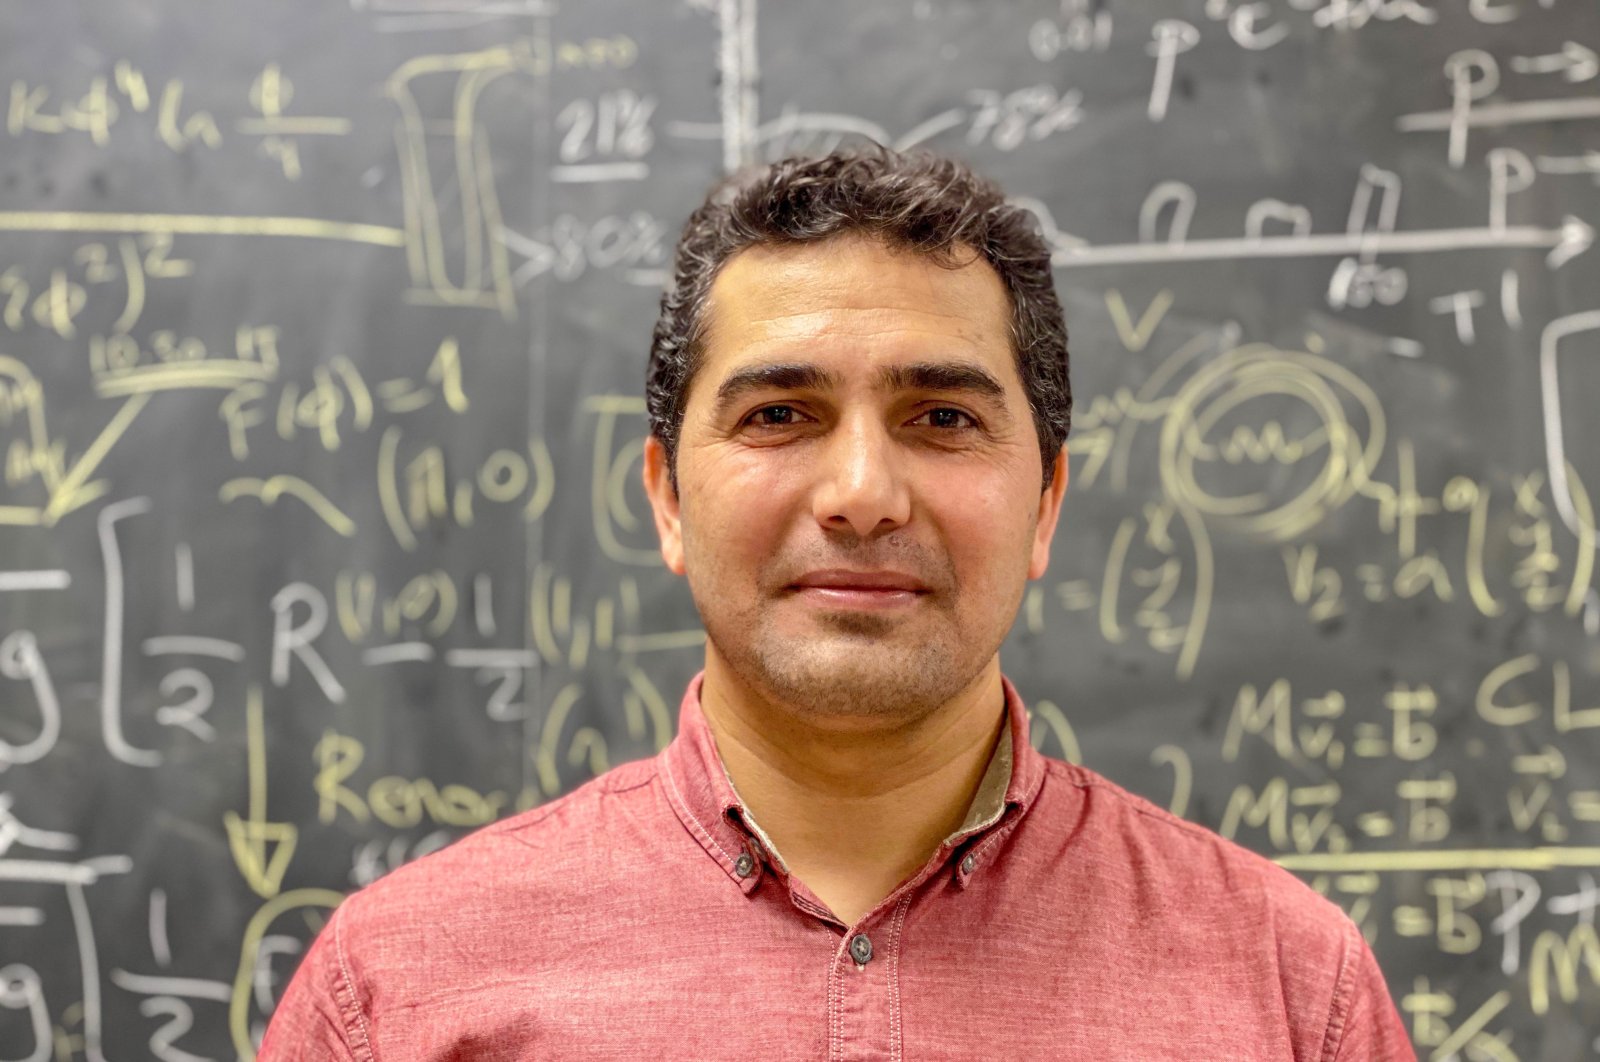 33-year-old Emrah Tıraş wants to establish in Turkey an international neutrino research center and R&D detector project in the coming years. (DHA Photo)